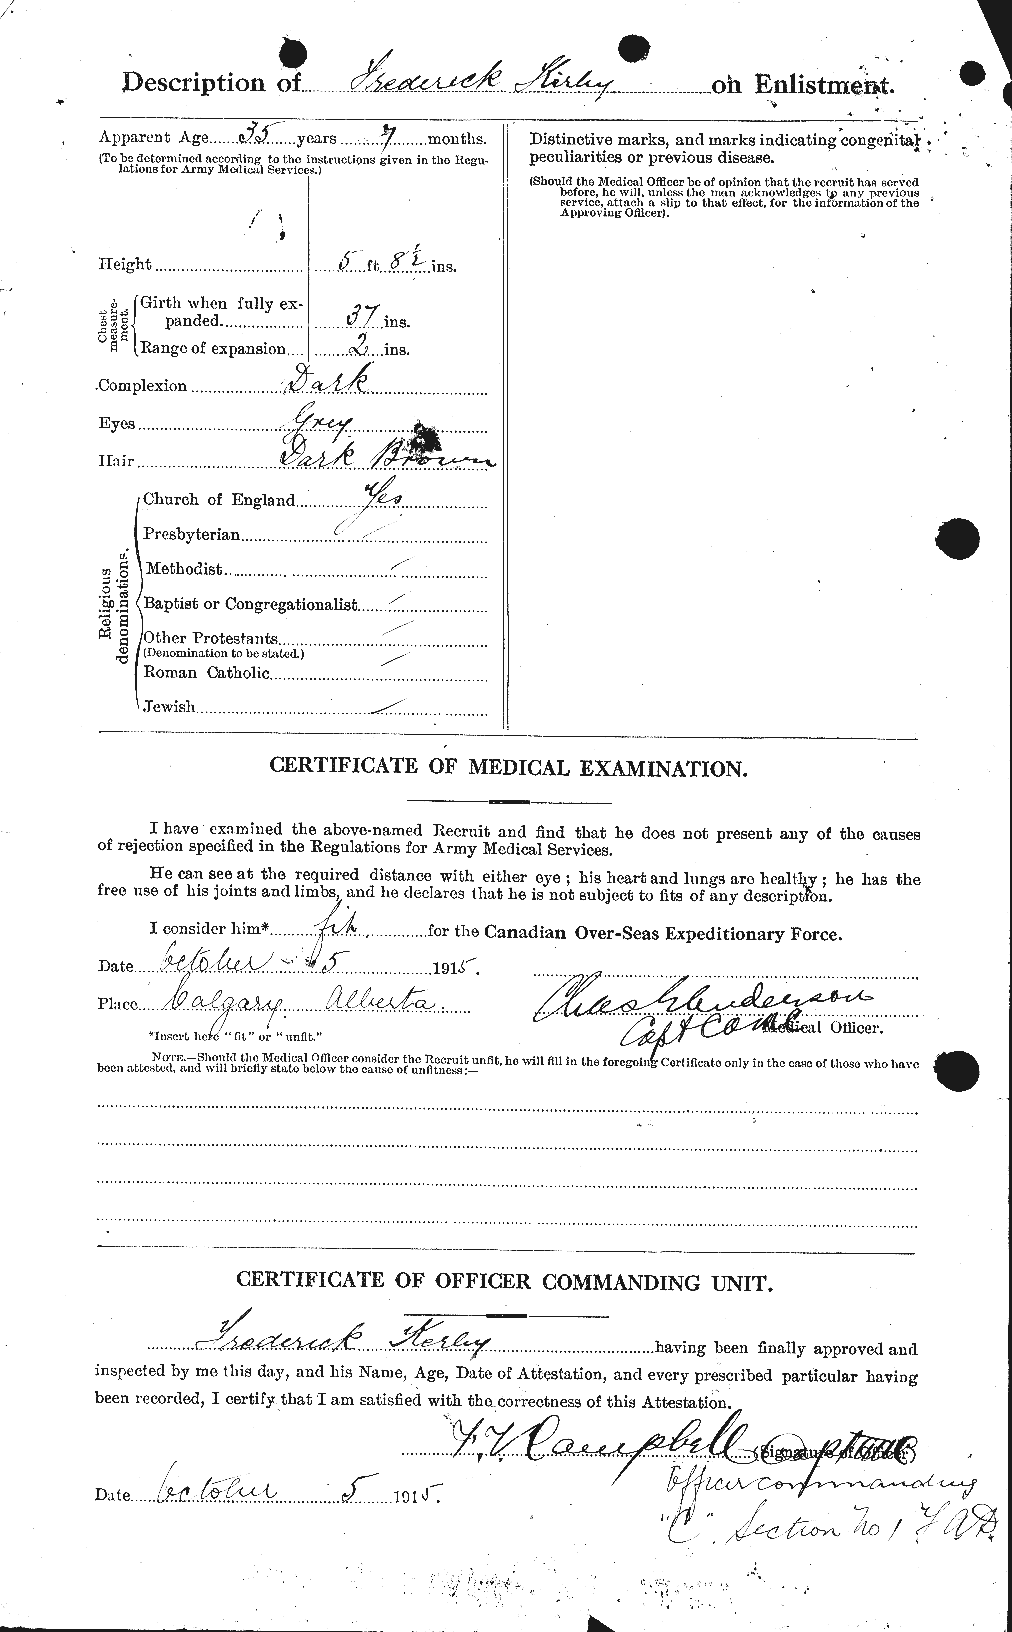 Personnel Records of the First World War - CEF 437187b